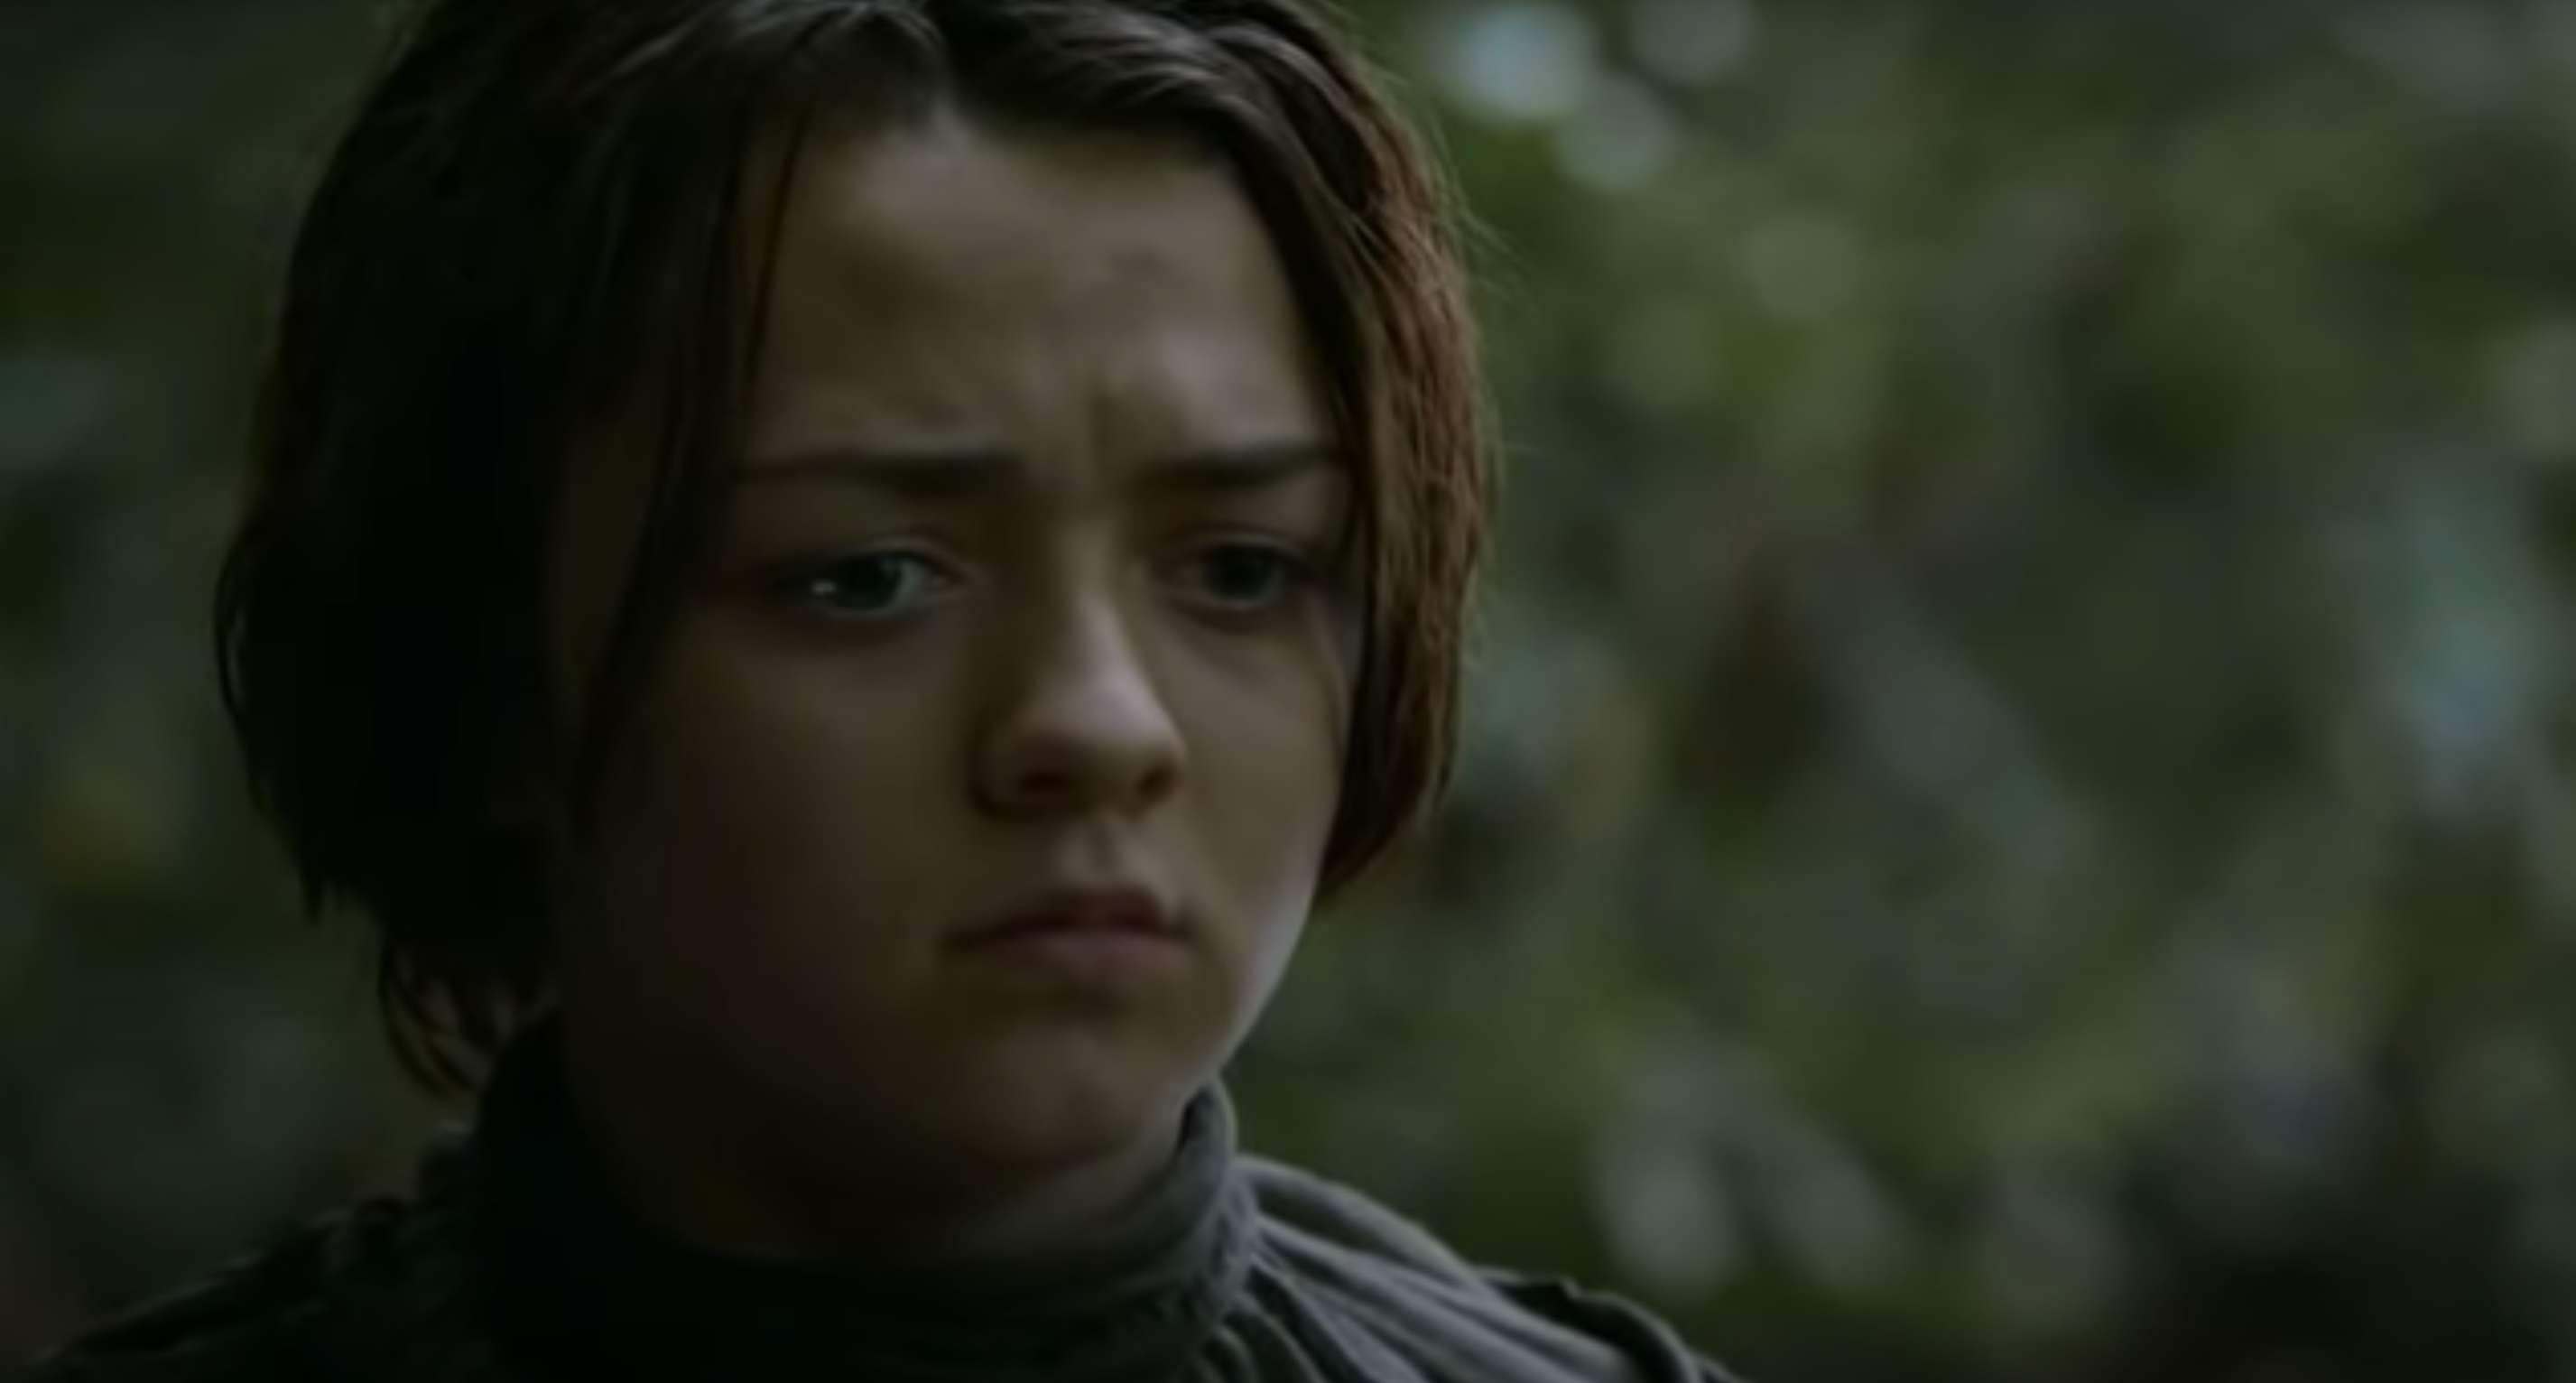 Still from Game of Thrones: Arya stands in the forest